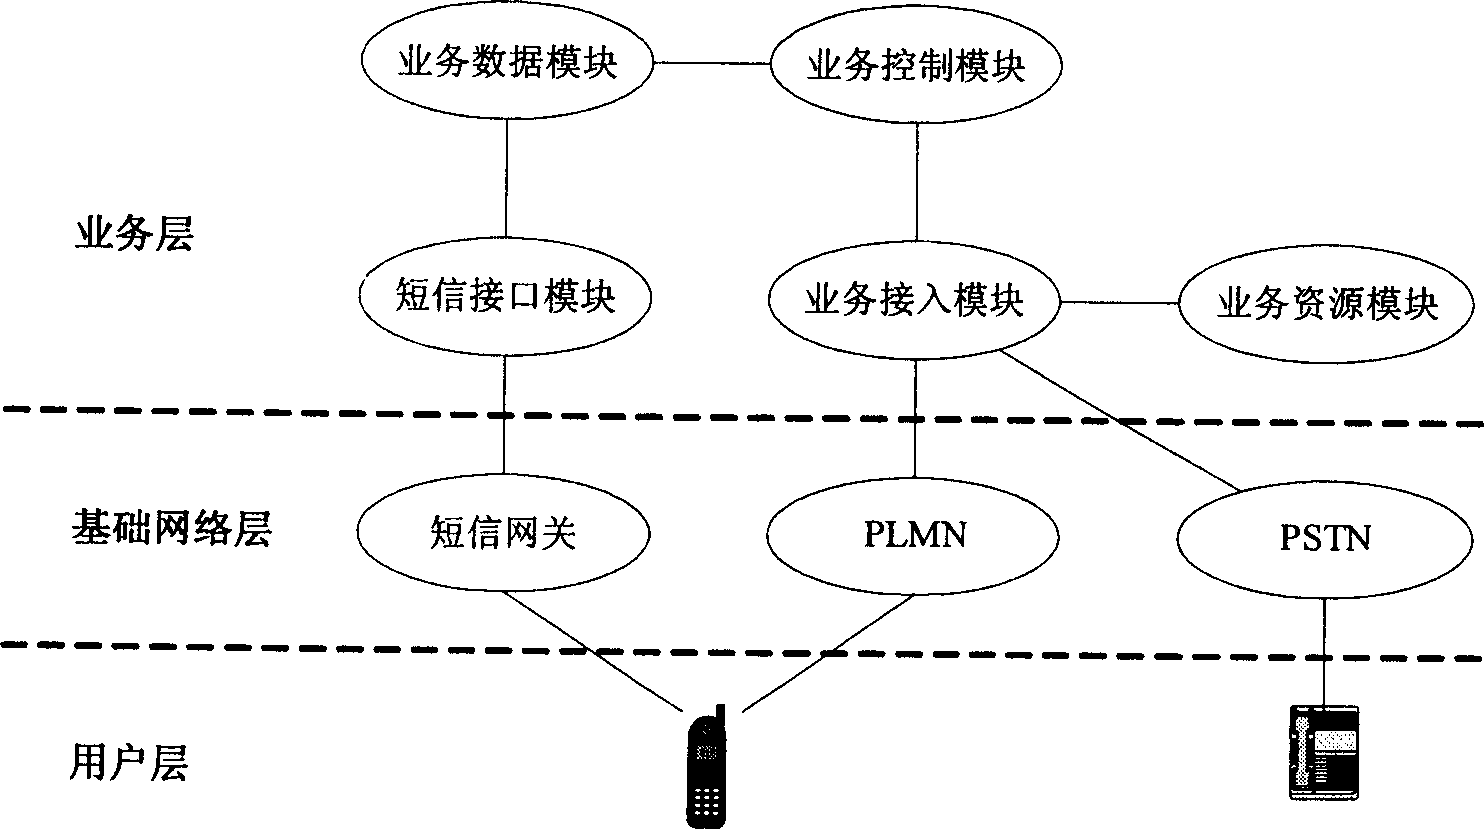 Method for realizing user extension set roaming by short message equipment